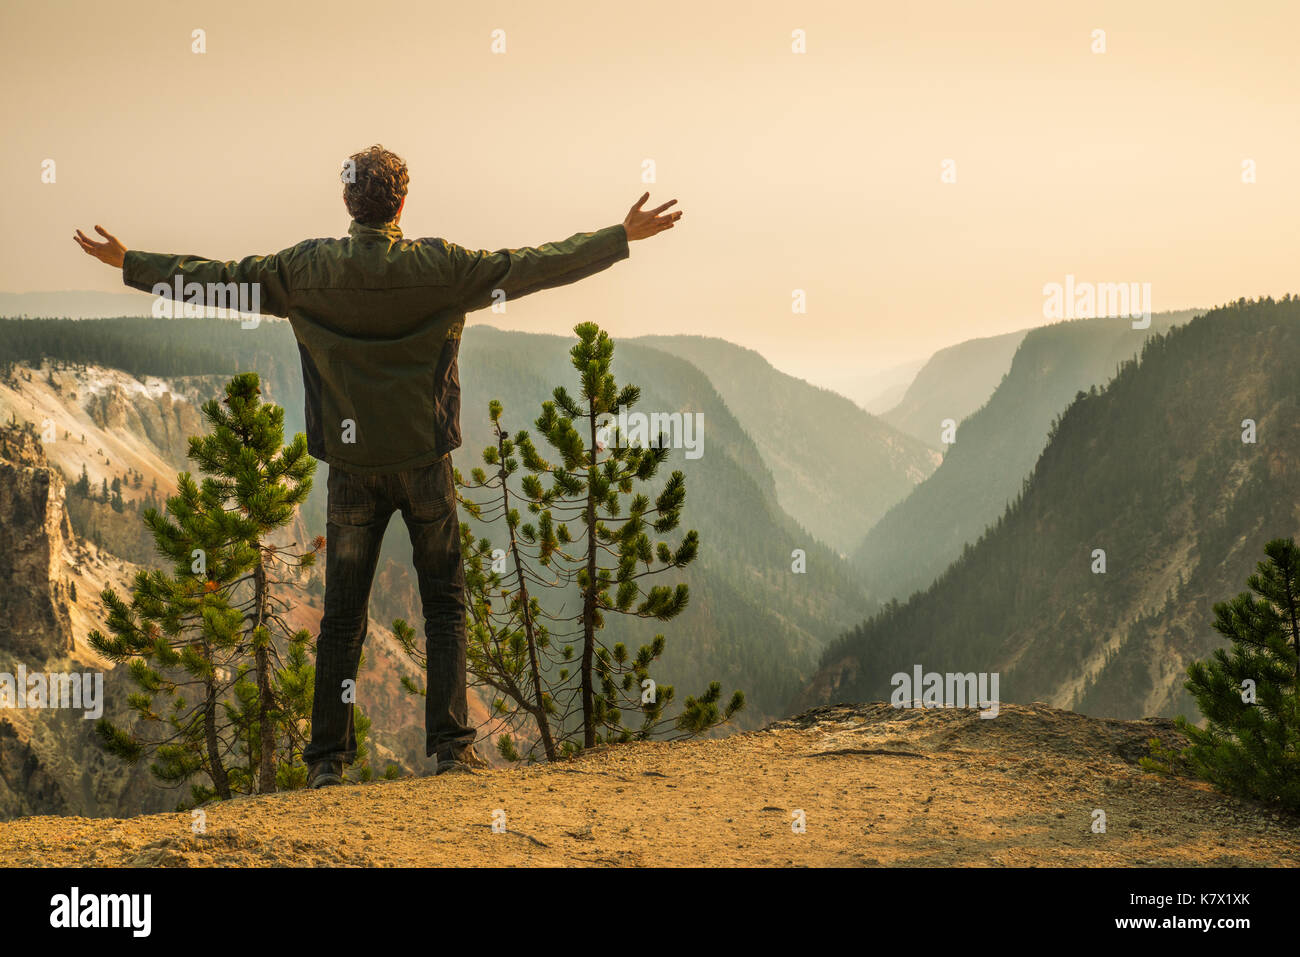 Yellowstone National Park, WY, USA 21st August 2015. Man alone with open arms looking at view of the Grand Canyon of Yellowstone River from above. Rel Stock Photo